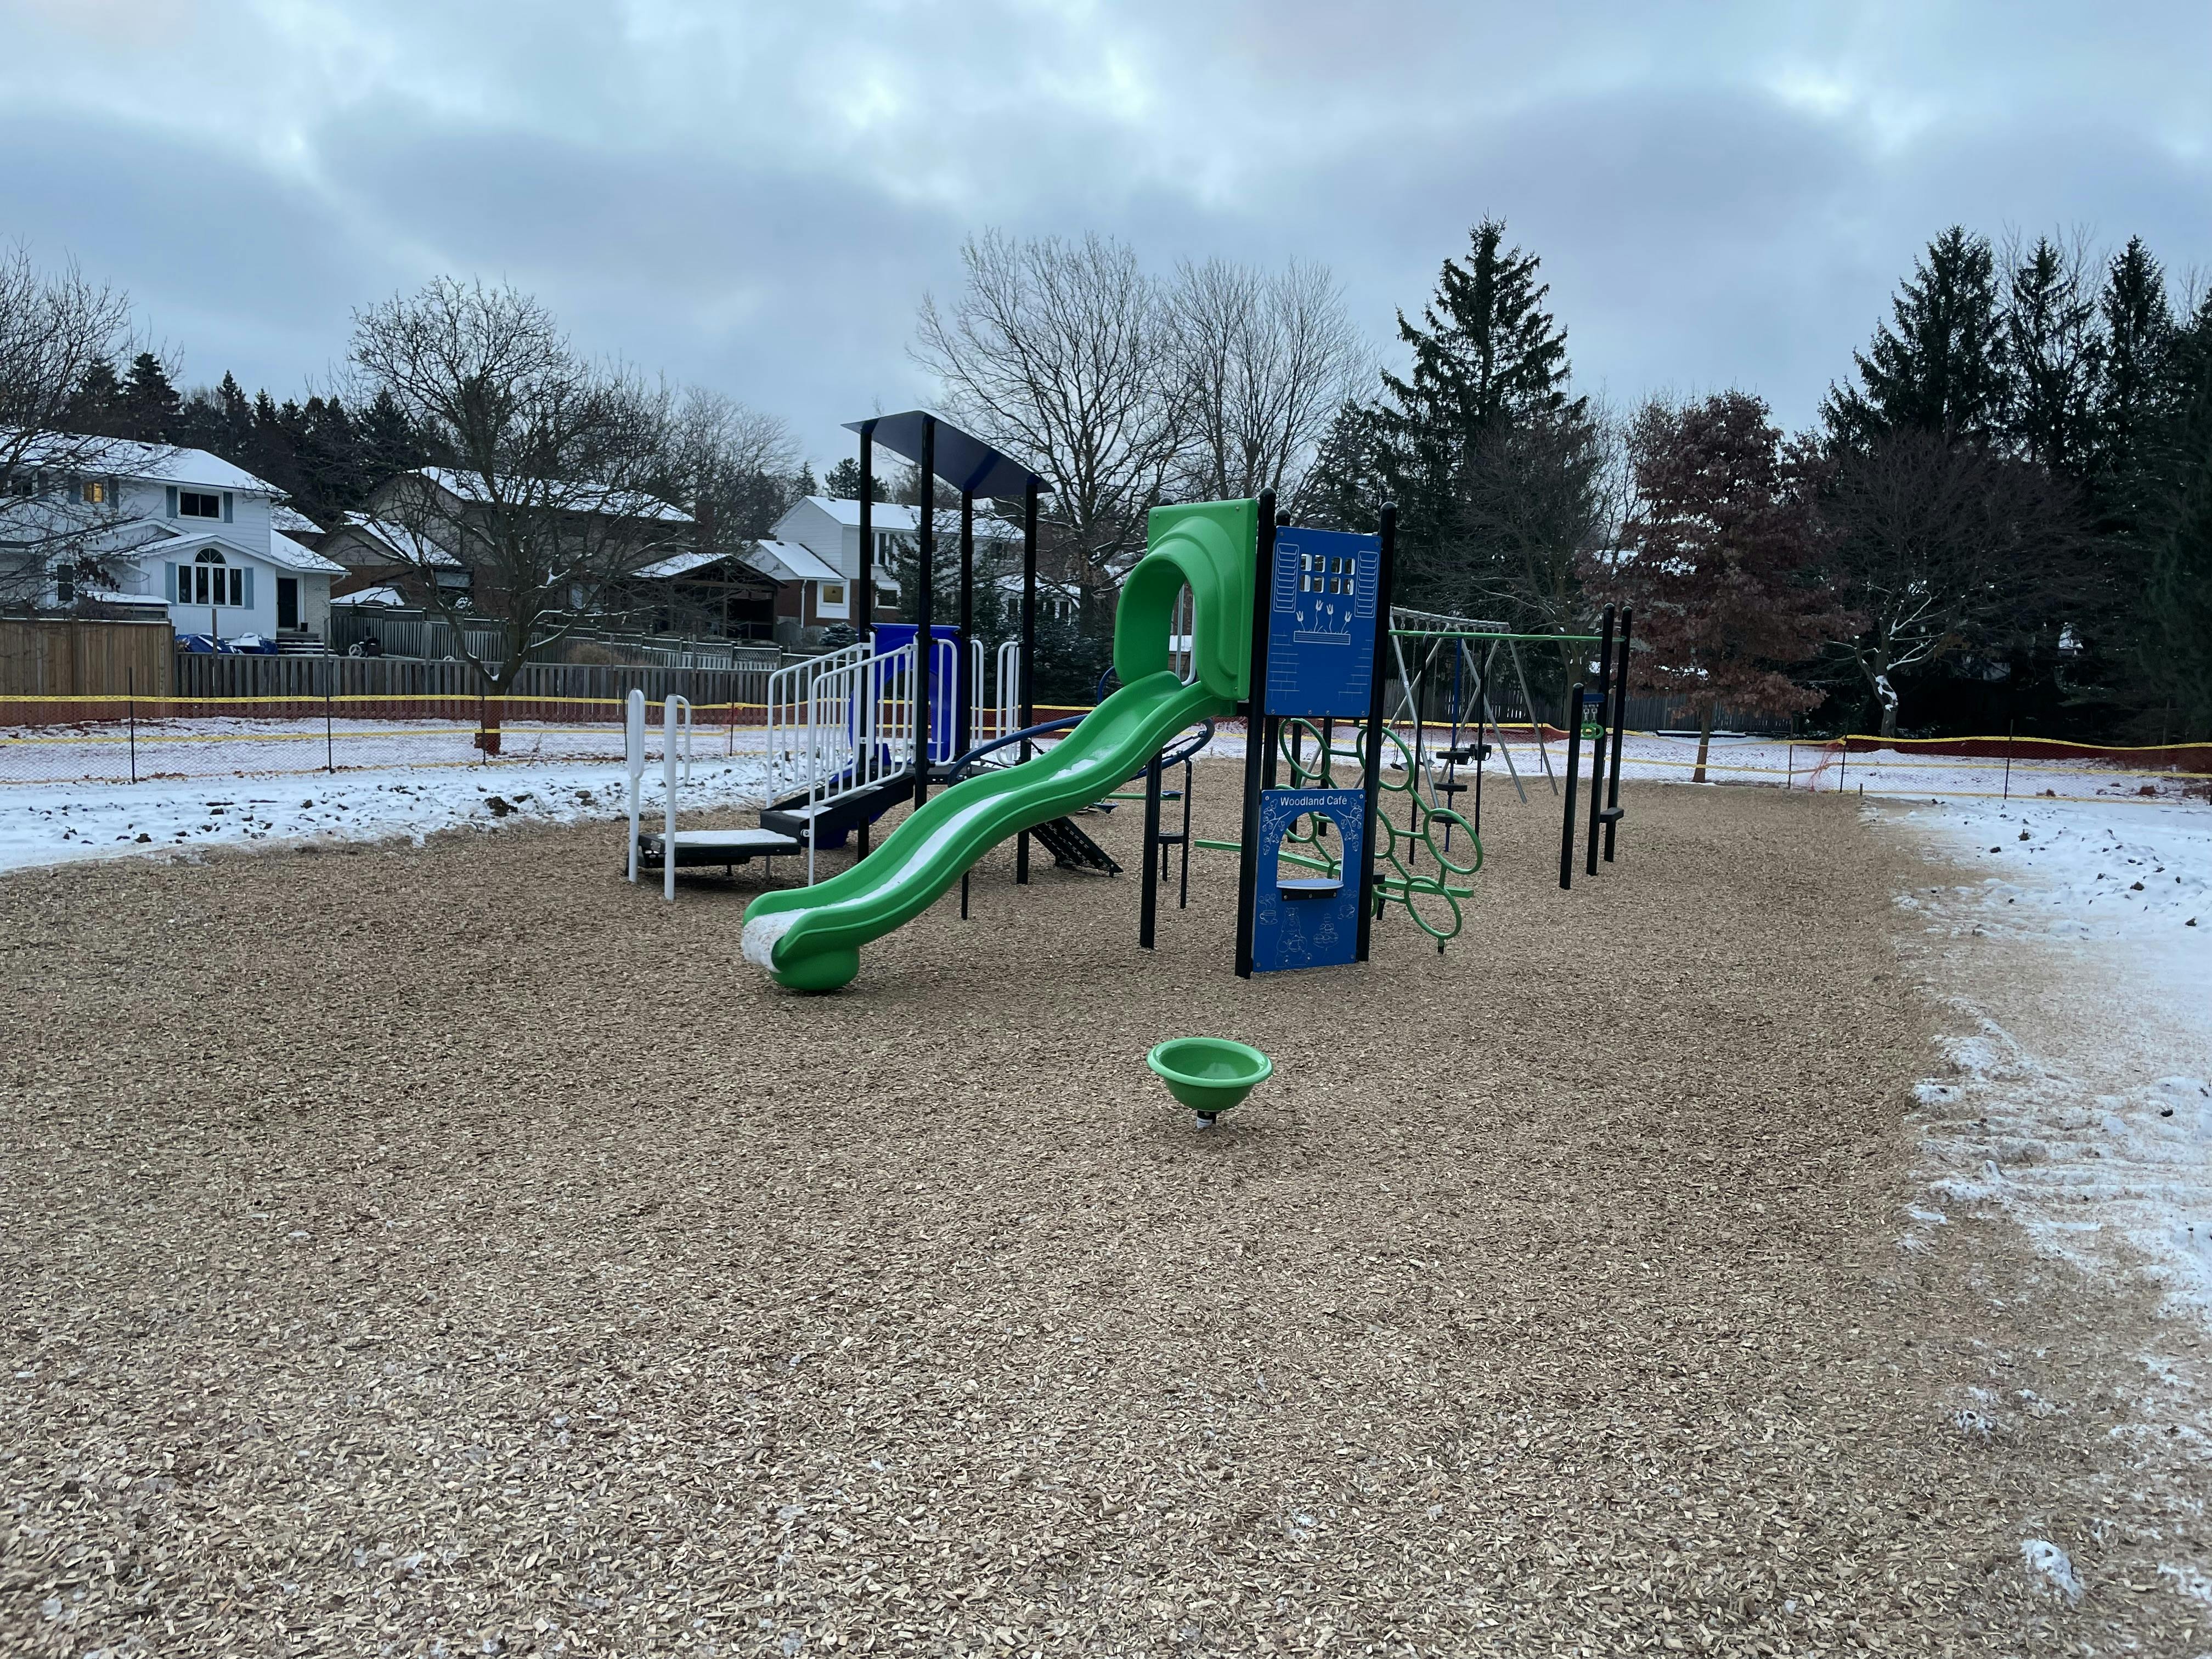 Thorndale playground with various new play structures including slides, climbing structures, swings and monkey bars.